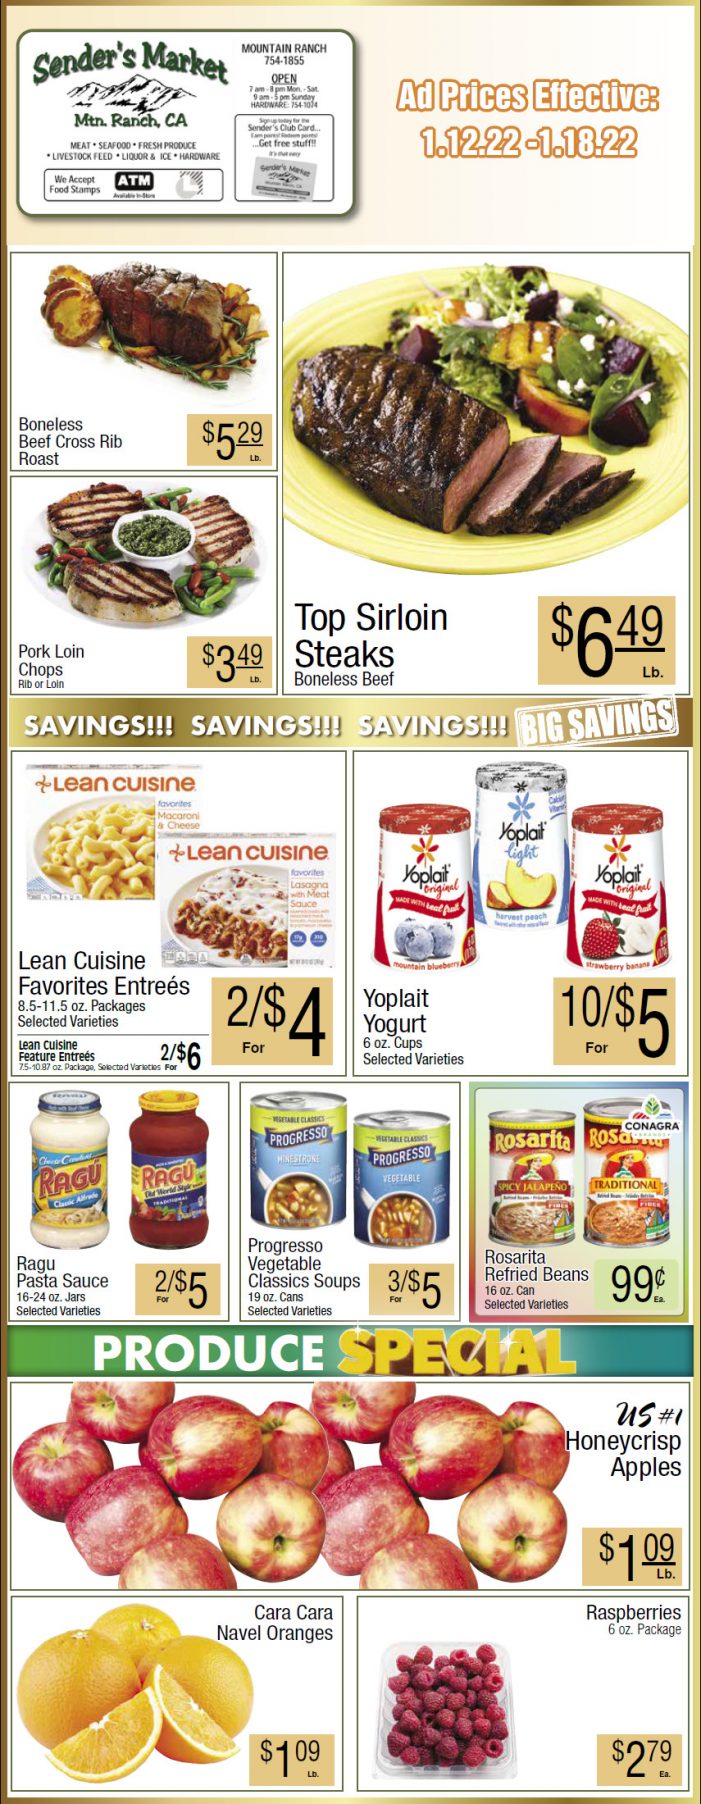 Sender’s Market’s Weekly Ad & Grocery Specials Through January 18th Shop Local & Save!